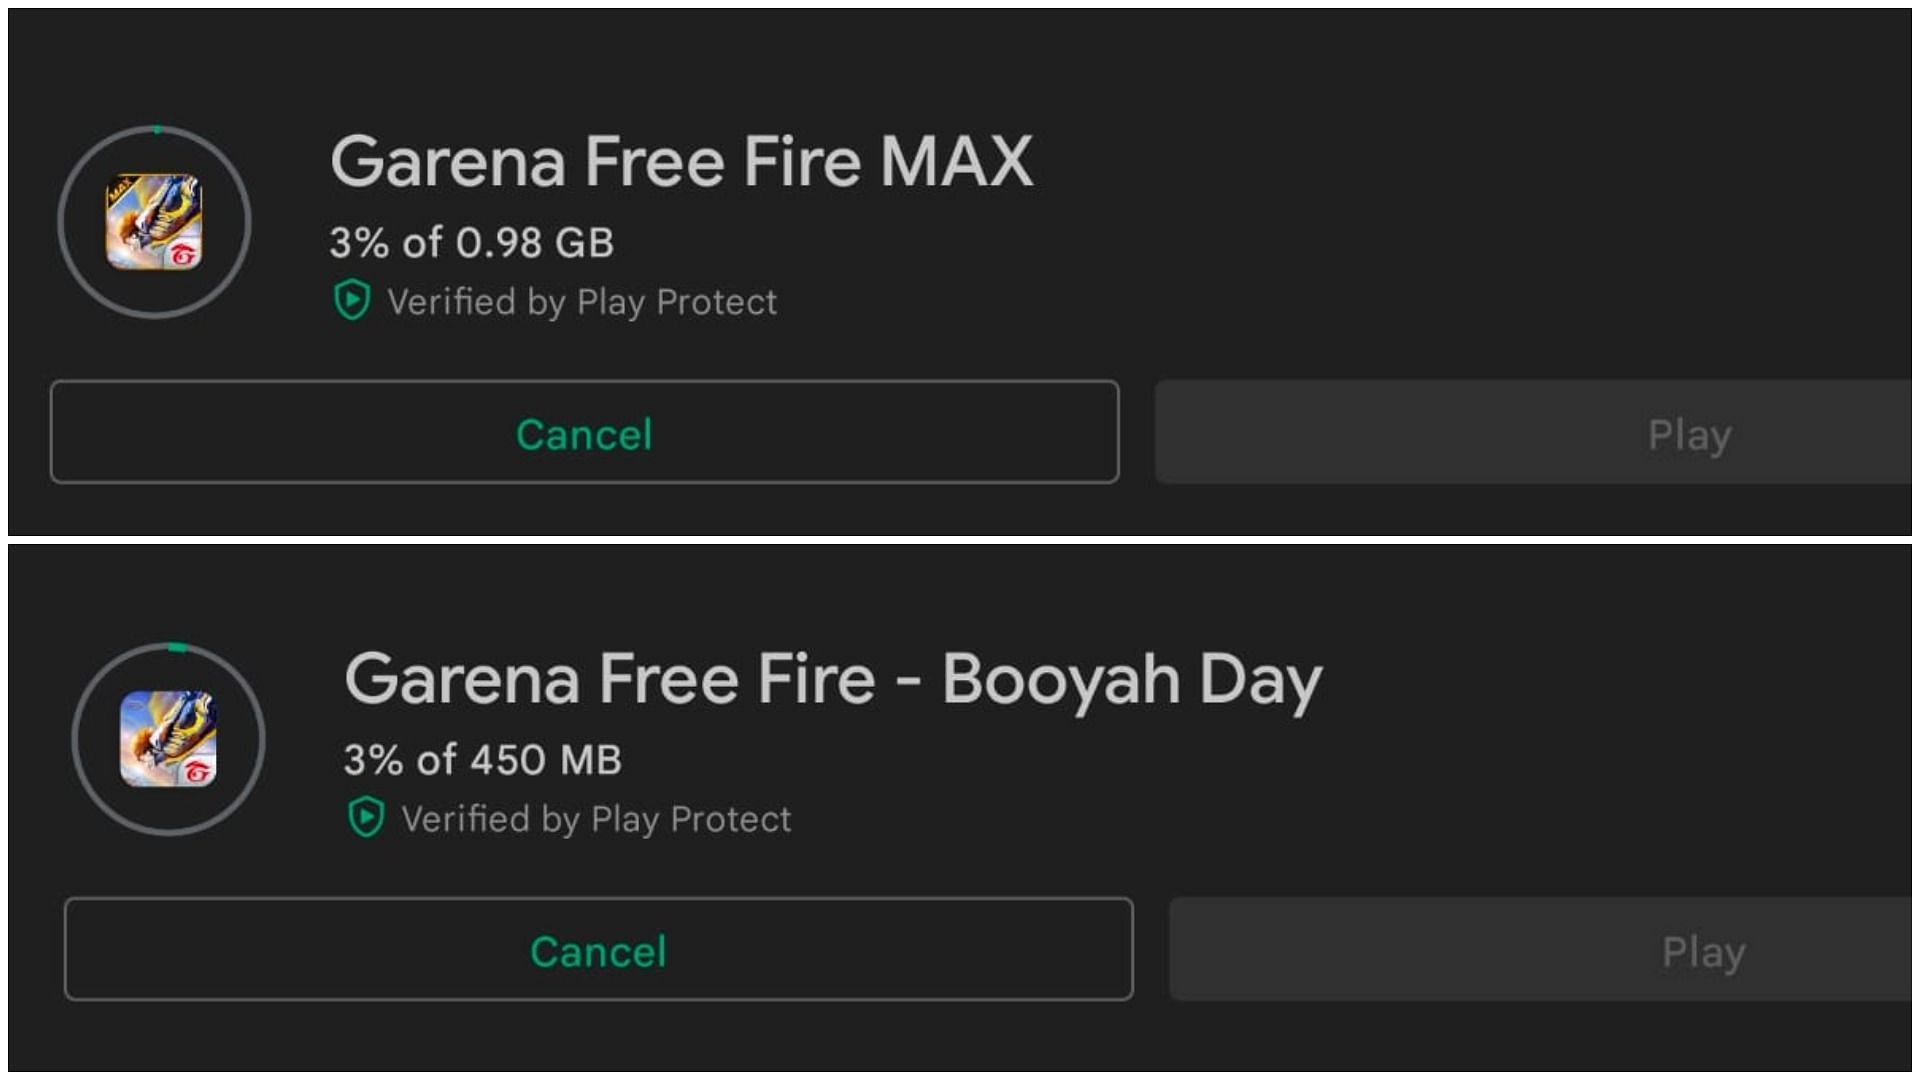 The download size for both games (Image via Google Play)